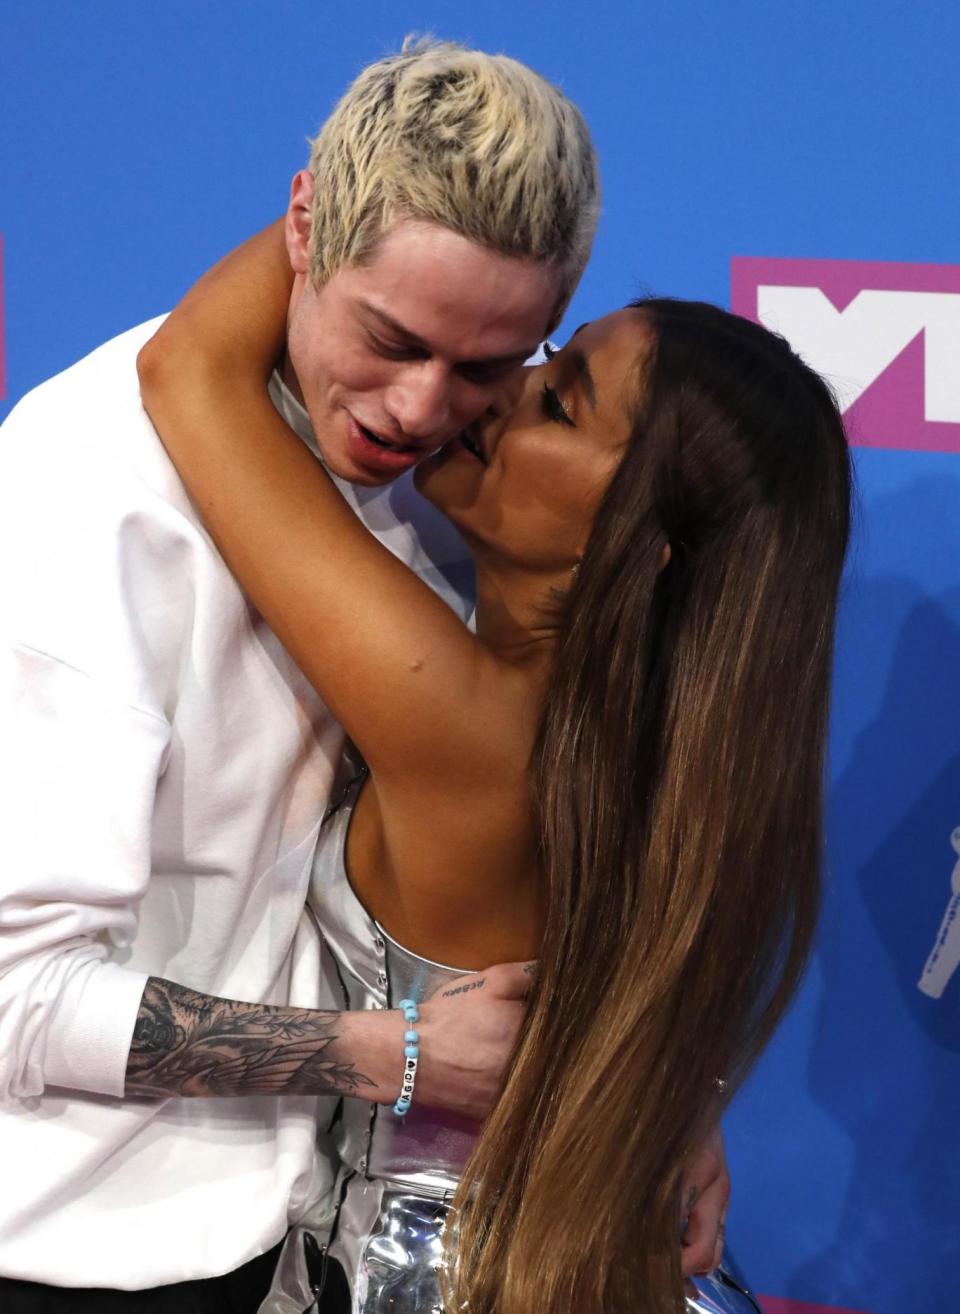 Whirlwind: Pete Davidson and Ariana Grande (Reuters)